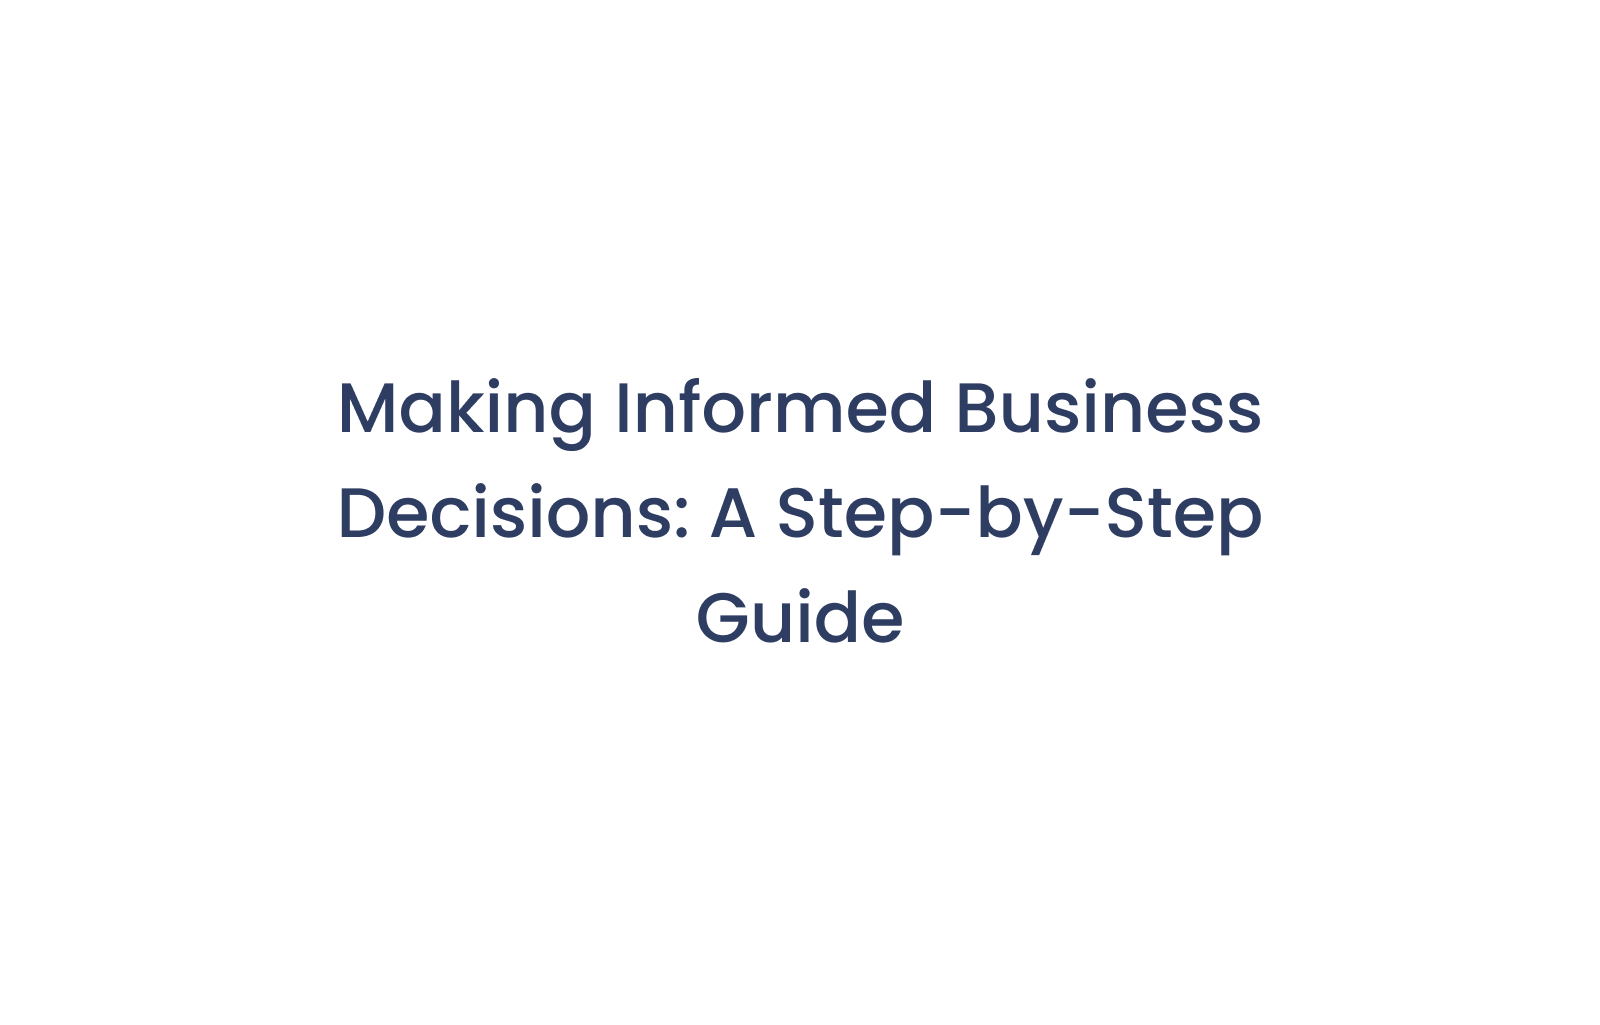 Making Informed Business Decisions: A Step-by-Step Guide